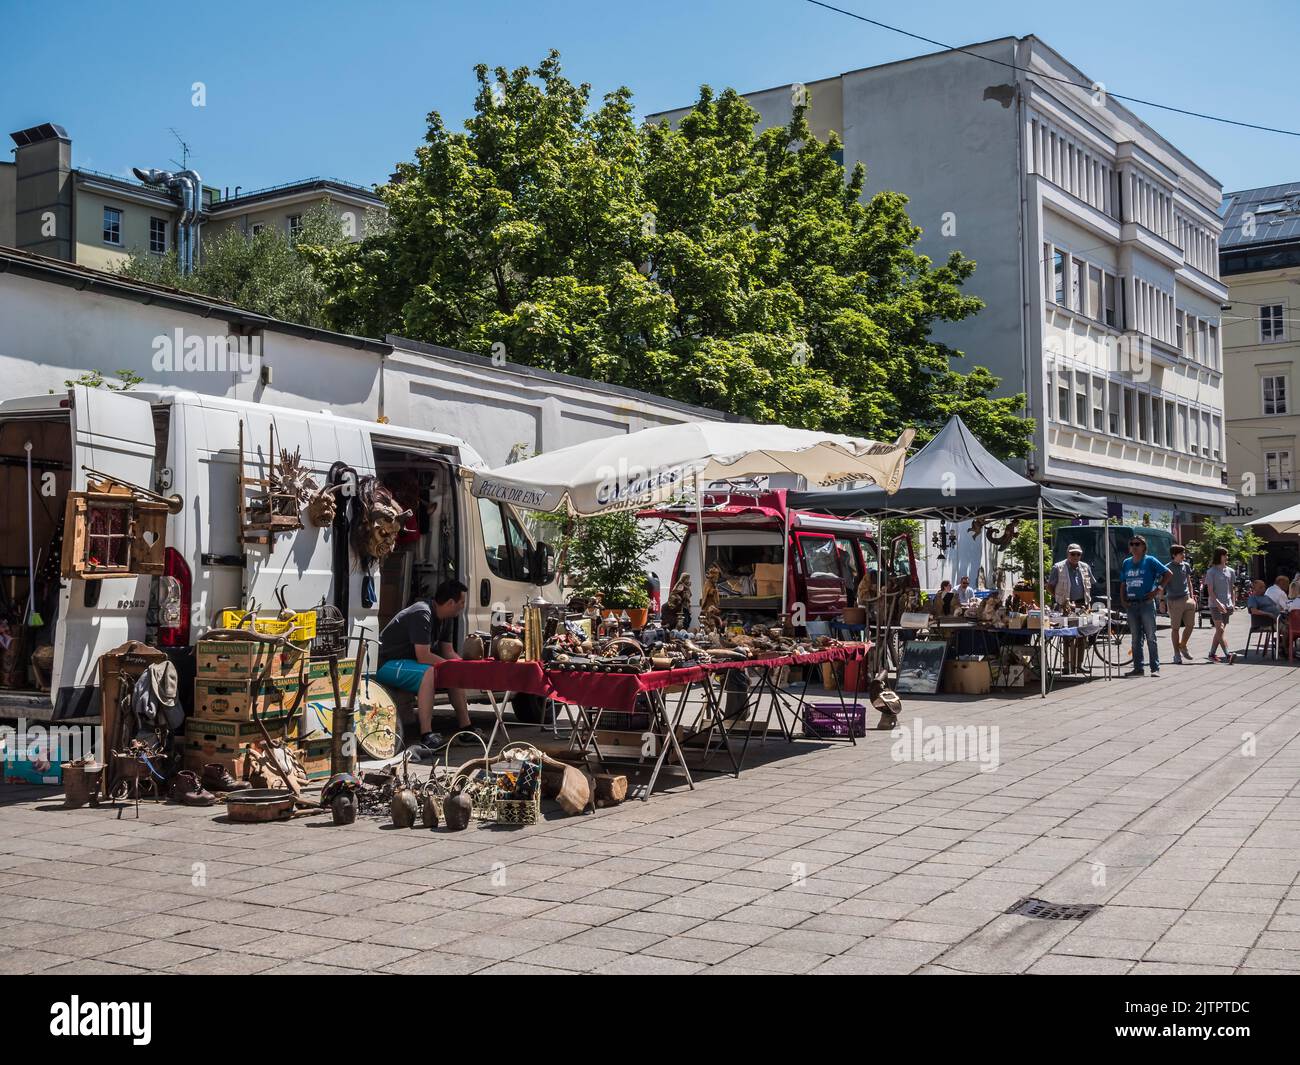 This street scene image is of the flea market antique fair held every Saturday in the old medieval city of Innsbruck, provincial capital city of Tirol Stock Photo